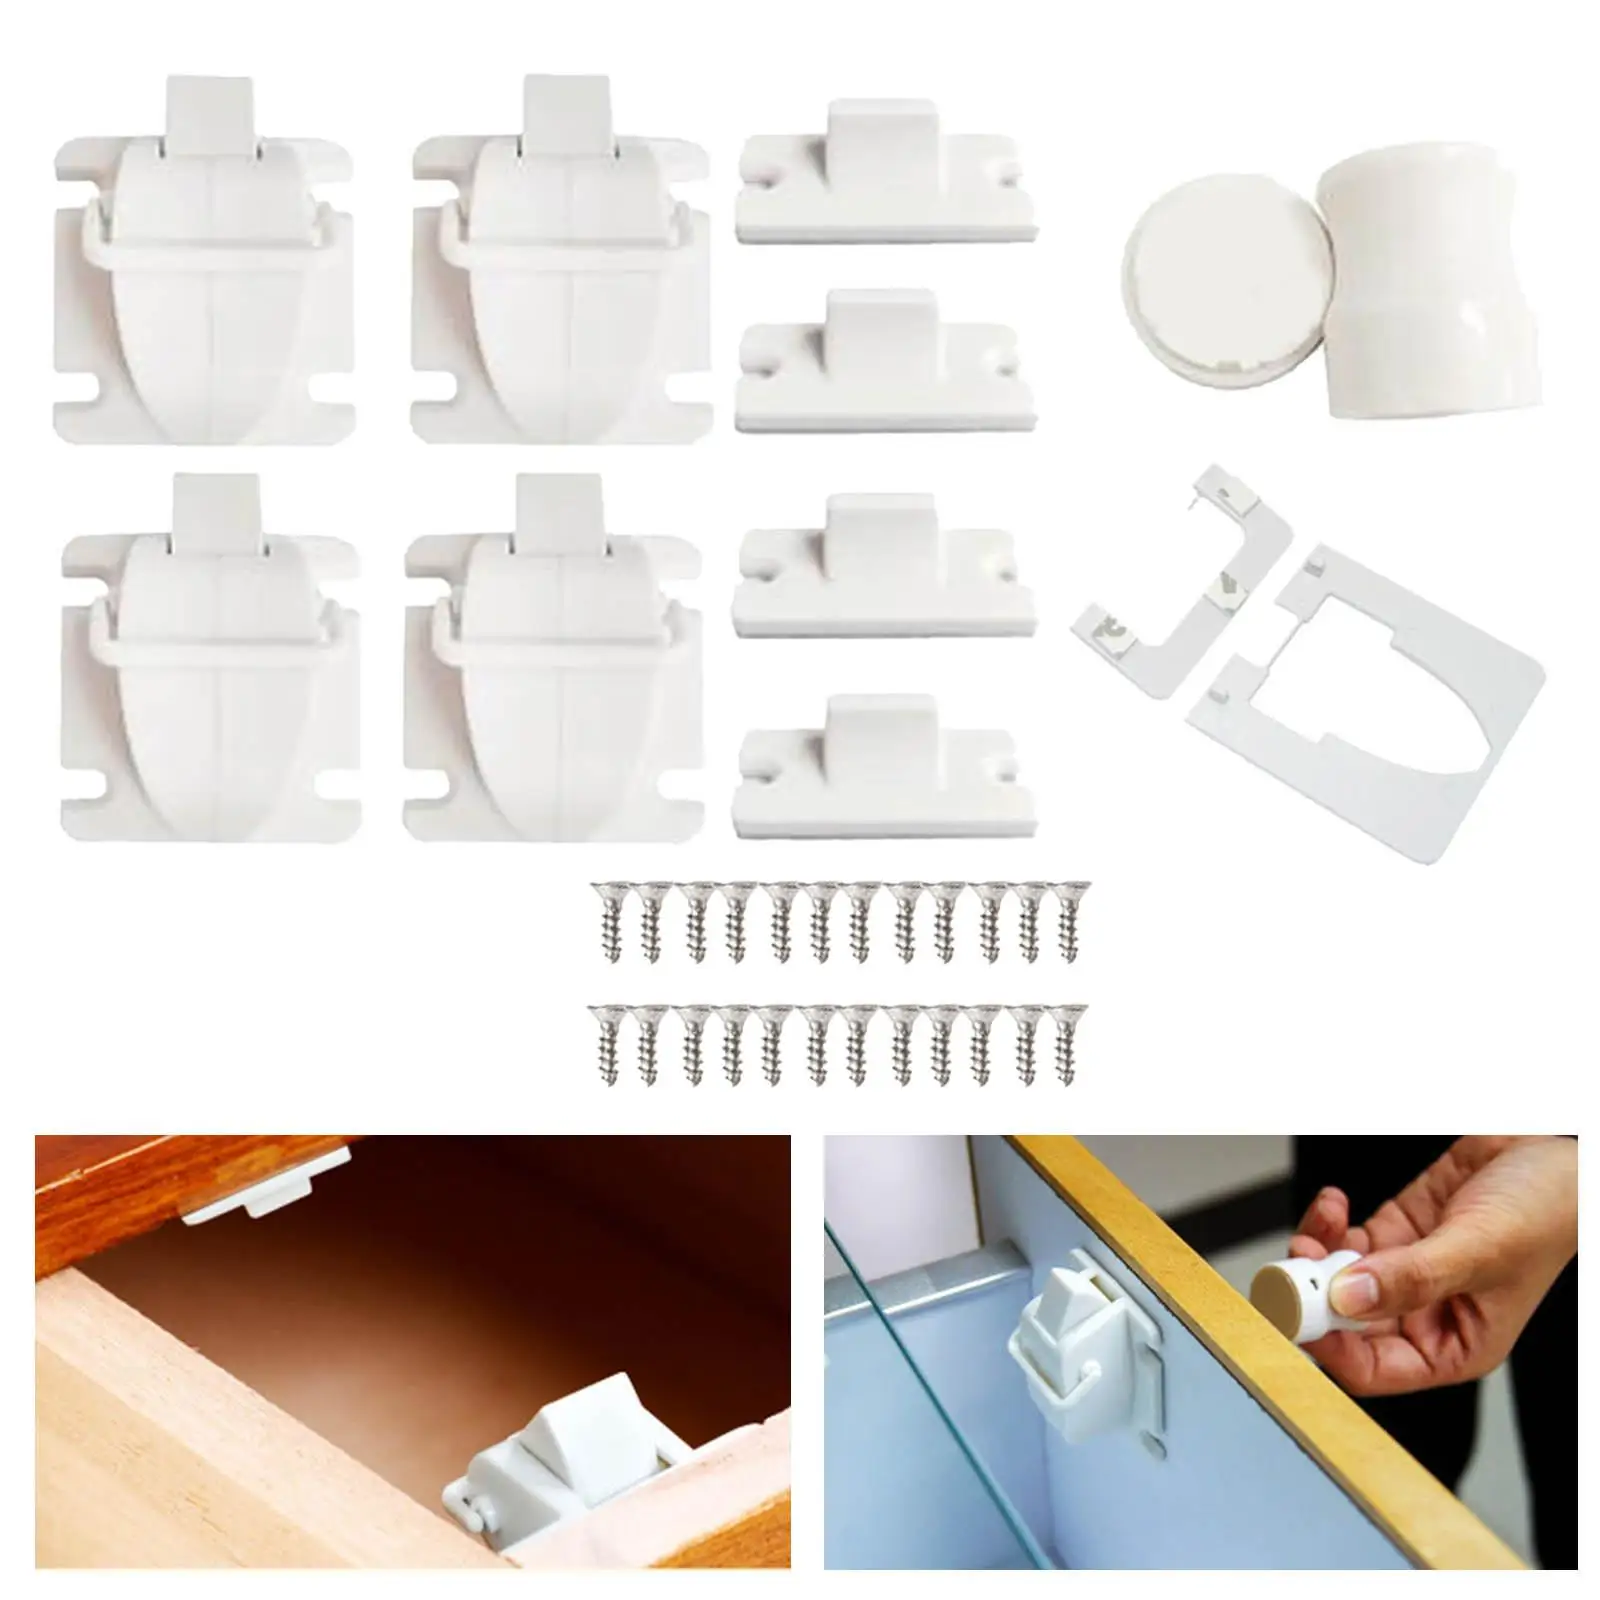 Baby Proofing Cabinet Locks Safety, Child Safety Cabinet Locks, Child Proof Cabinet Cupboard Lock Latches